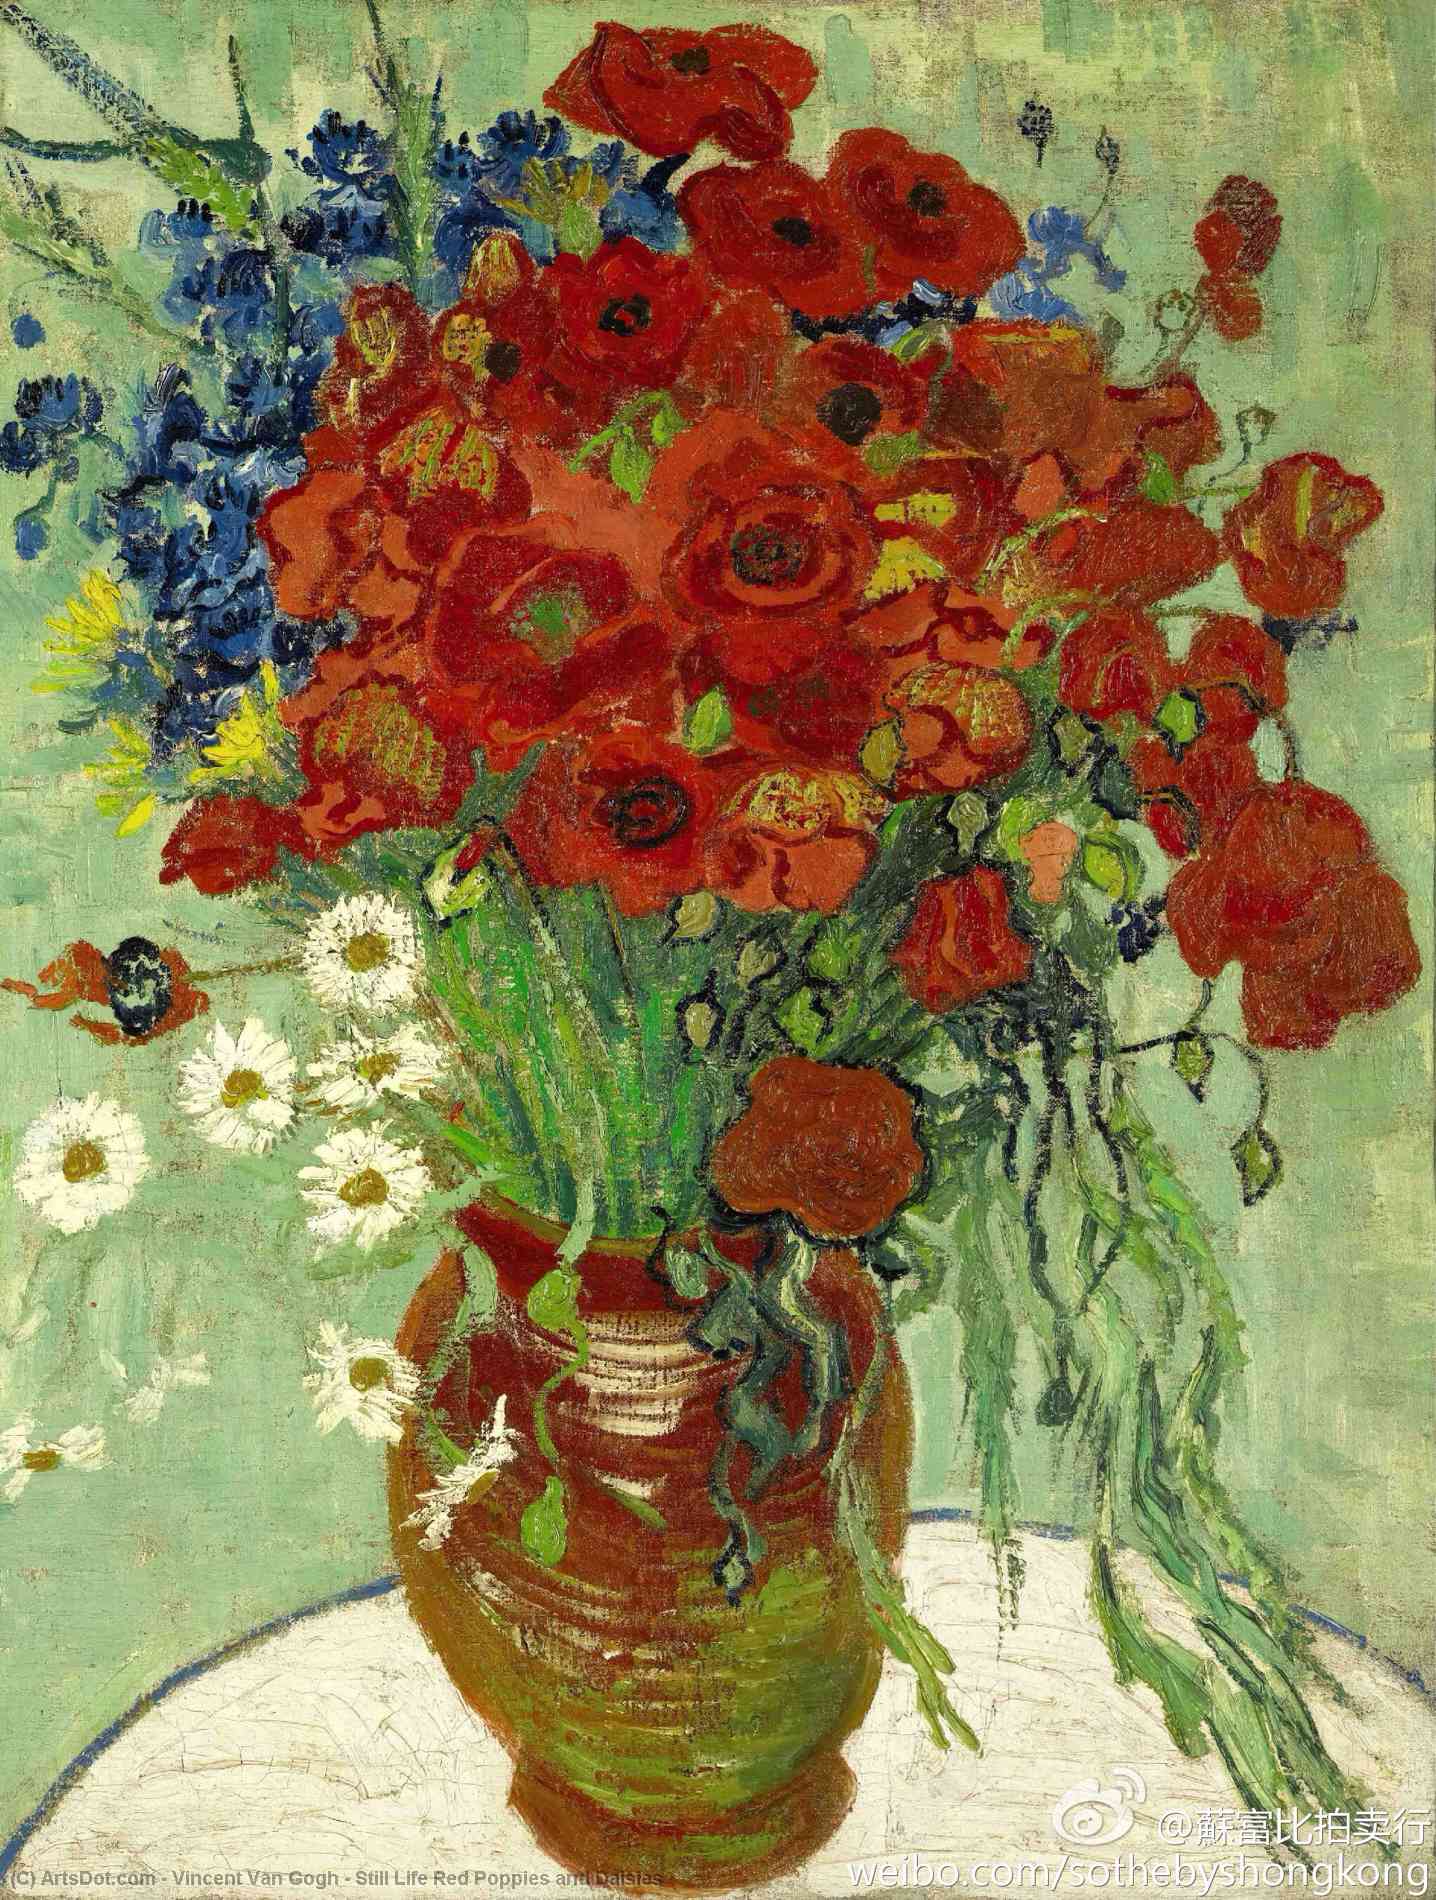 WikiOO.org - Encyclopedia of Fine Arts - Maalaus, taideteos Vincent Van Gogh - Still Life Red Poppies and Daisies